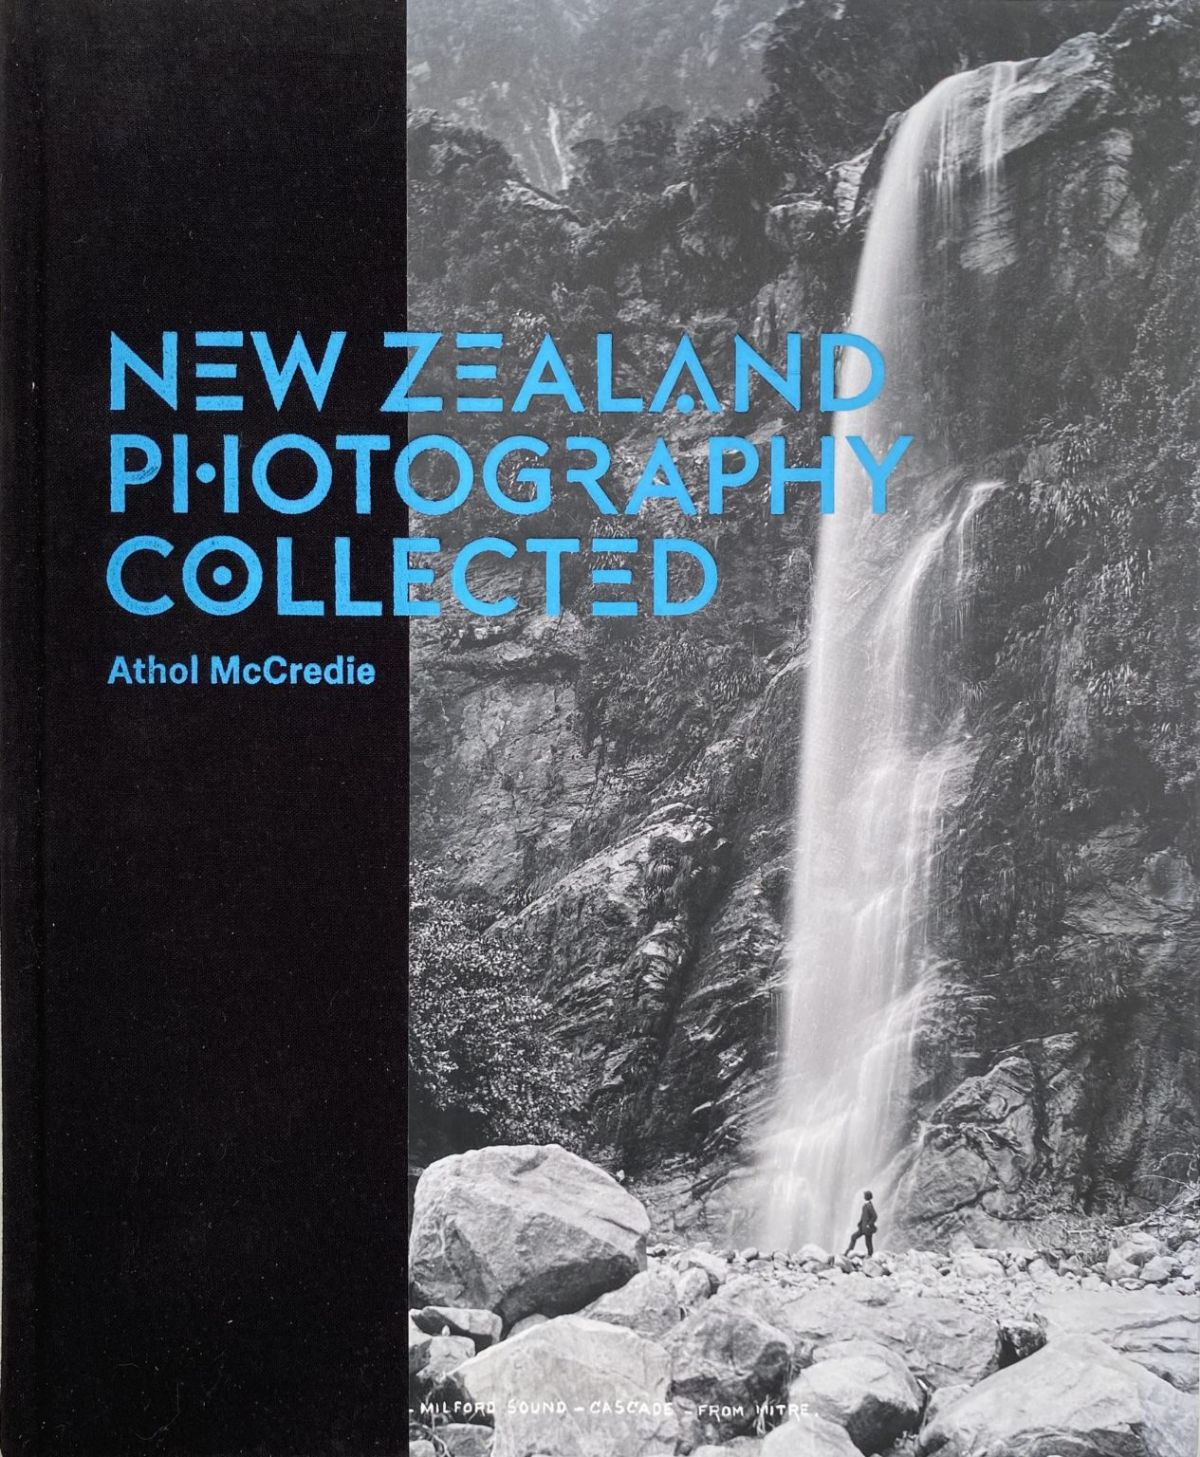 NEW ZEALAND PHOTOGRAPHY COLLECTED